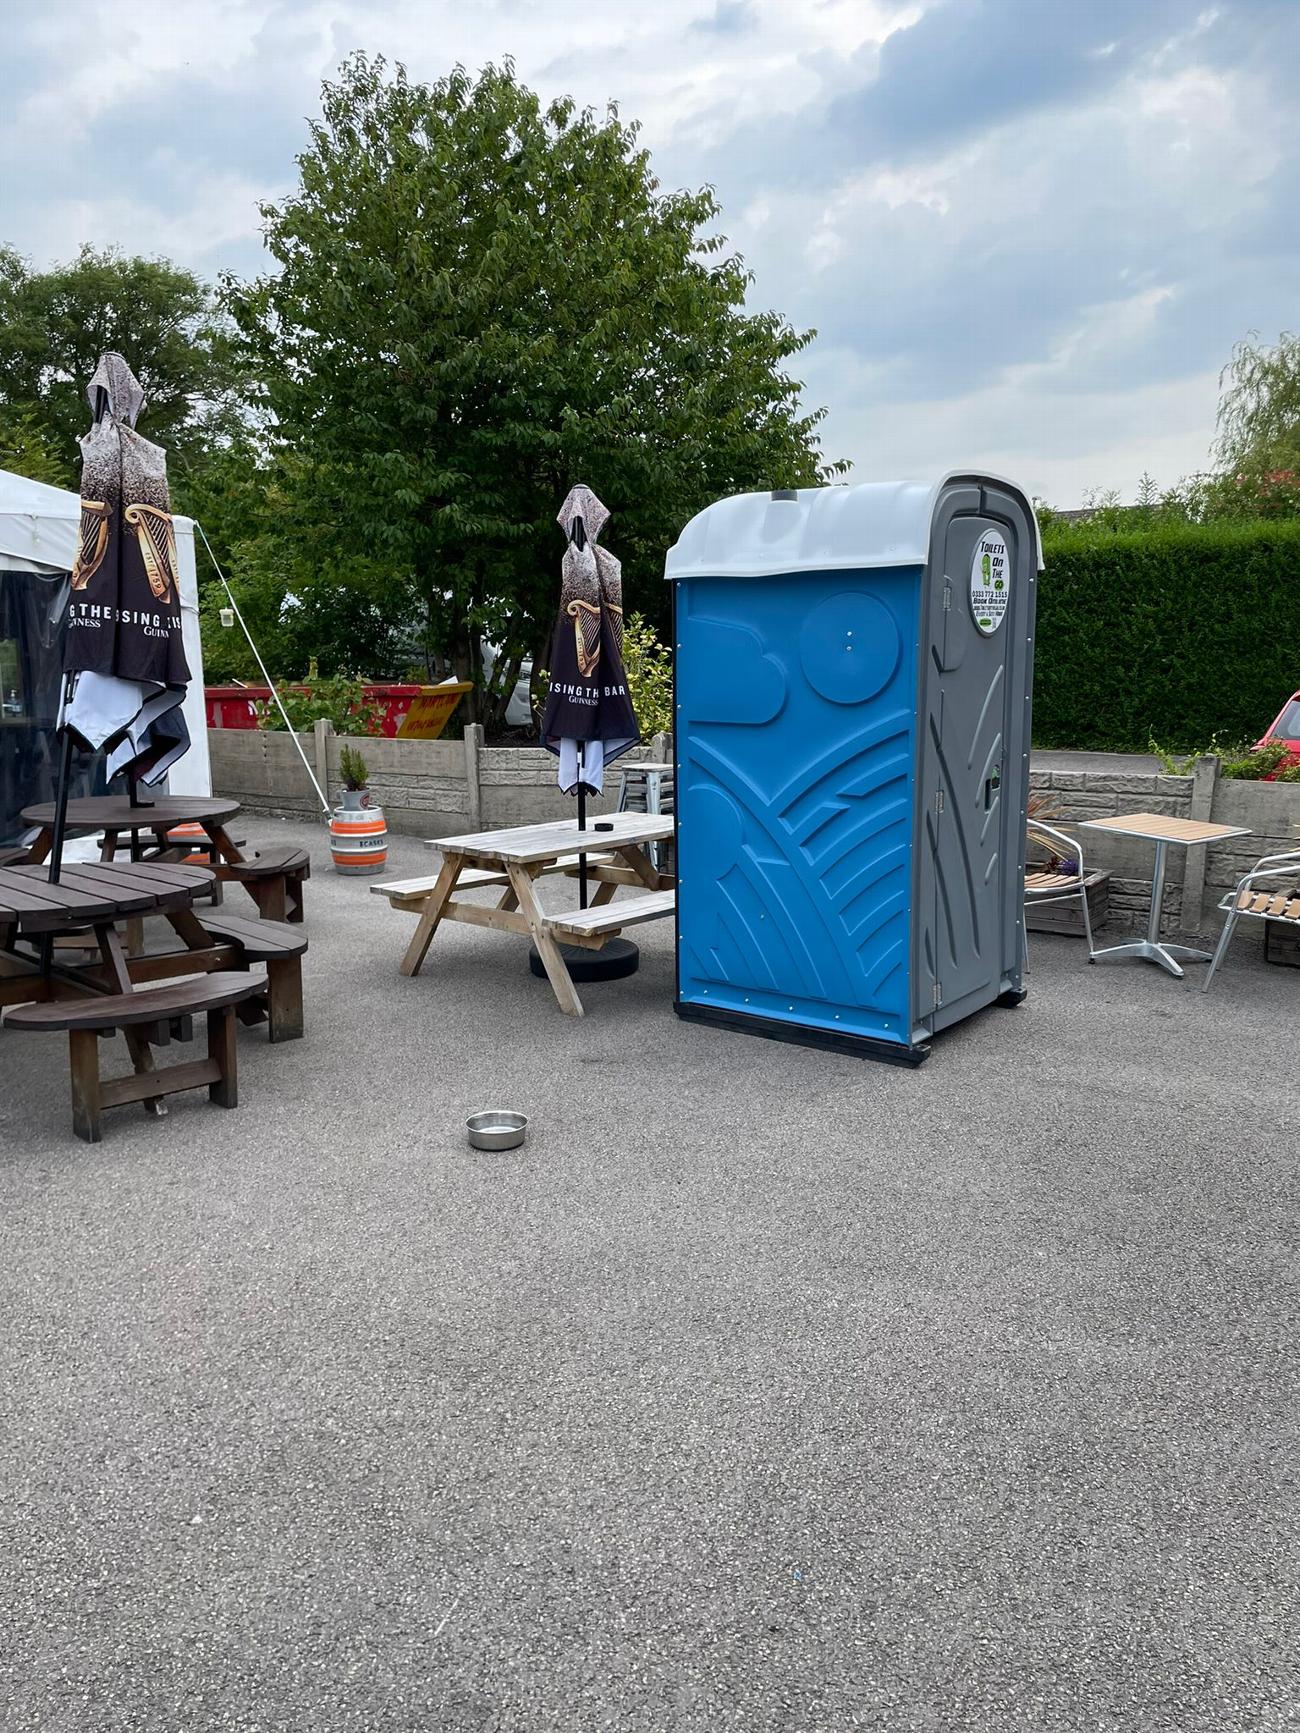 Gallery | Portable Toilet Loo Hire Rental Company in North West uk and Manchester gallery image 37